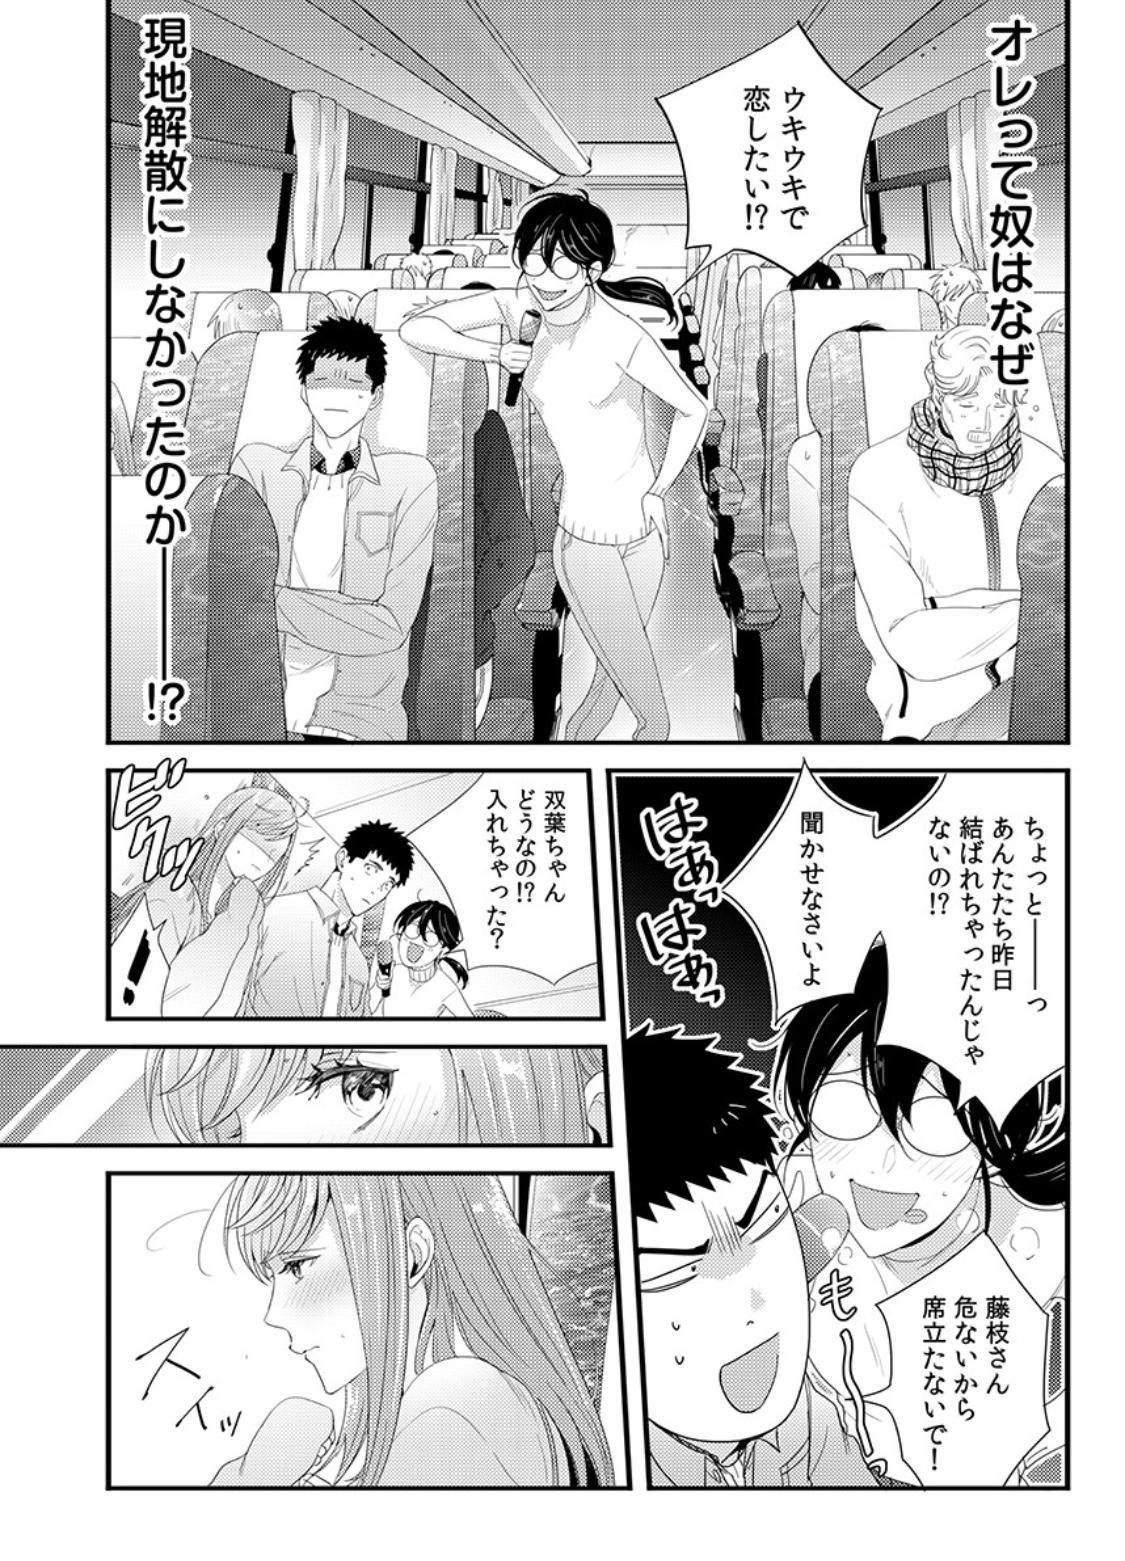 Please Let Me Hold You Futaba-San! Ch. 1+2 29